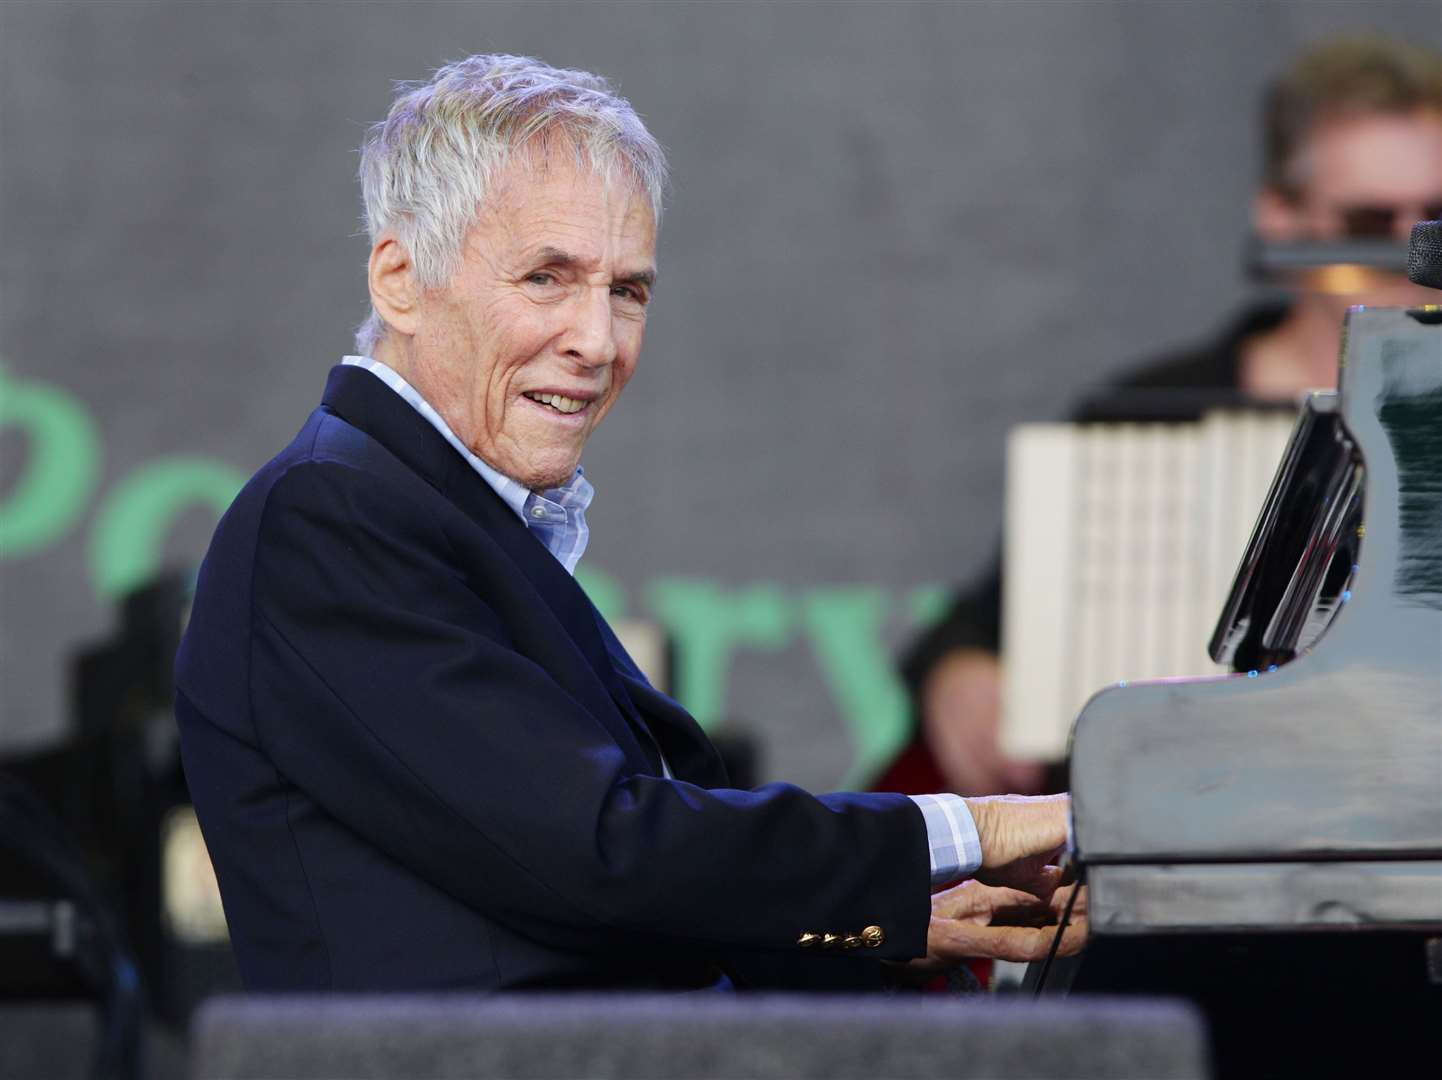 Burt Bacharach performing on The Pyramid Stage at the Glastonbury Festival, at Worthy Farm in Somerset in 2015 (Yui Mok/PA)